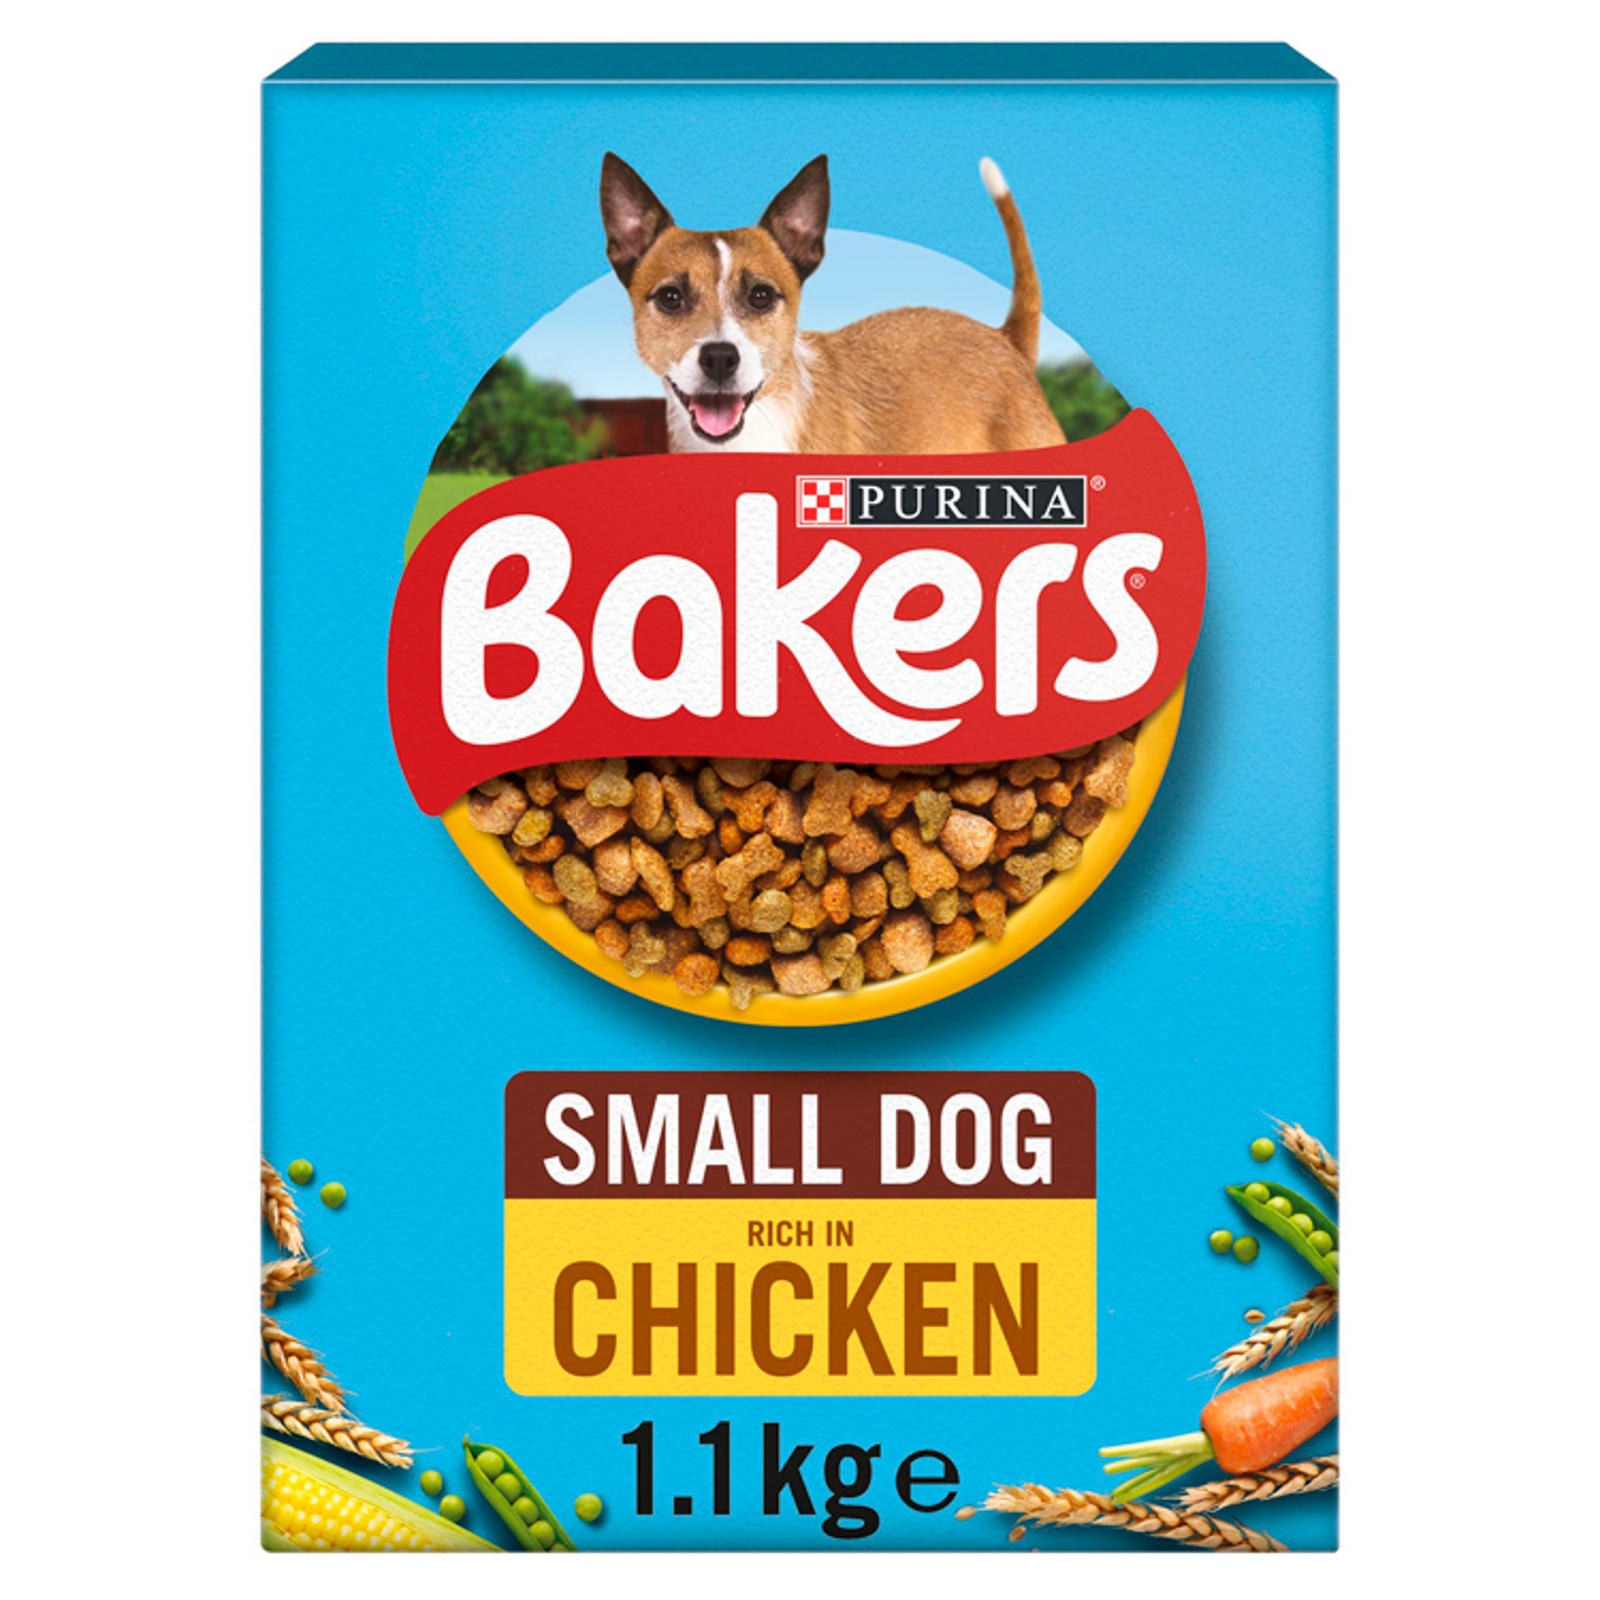 BAKERS Small Dog Chicken with Vegs Dry Dog Food 1.1kg ...